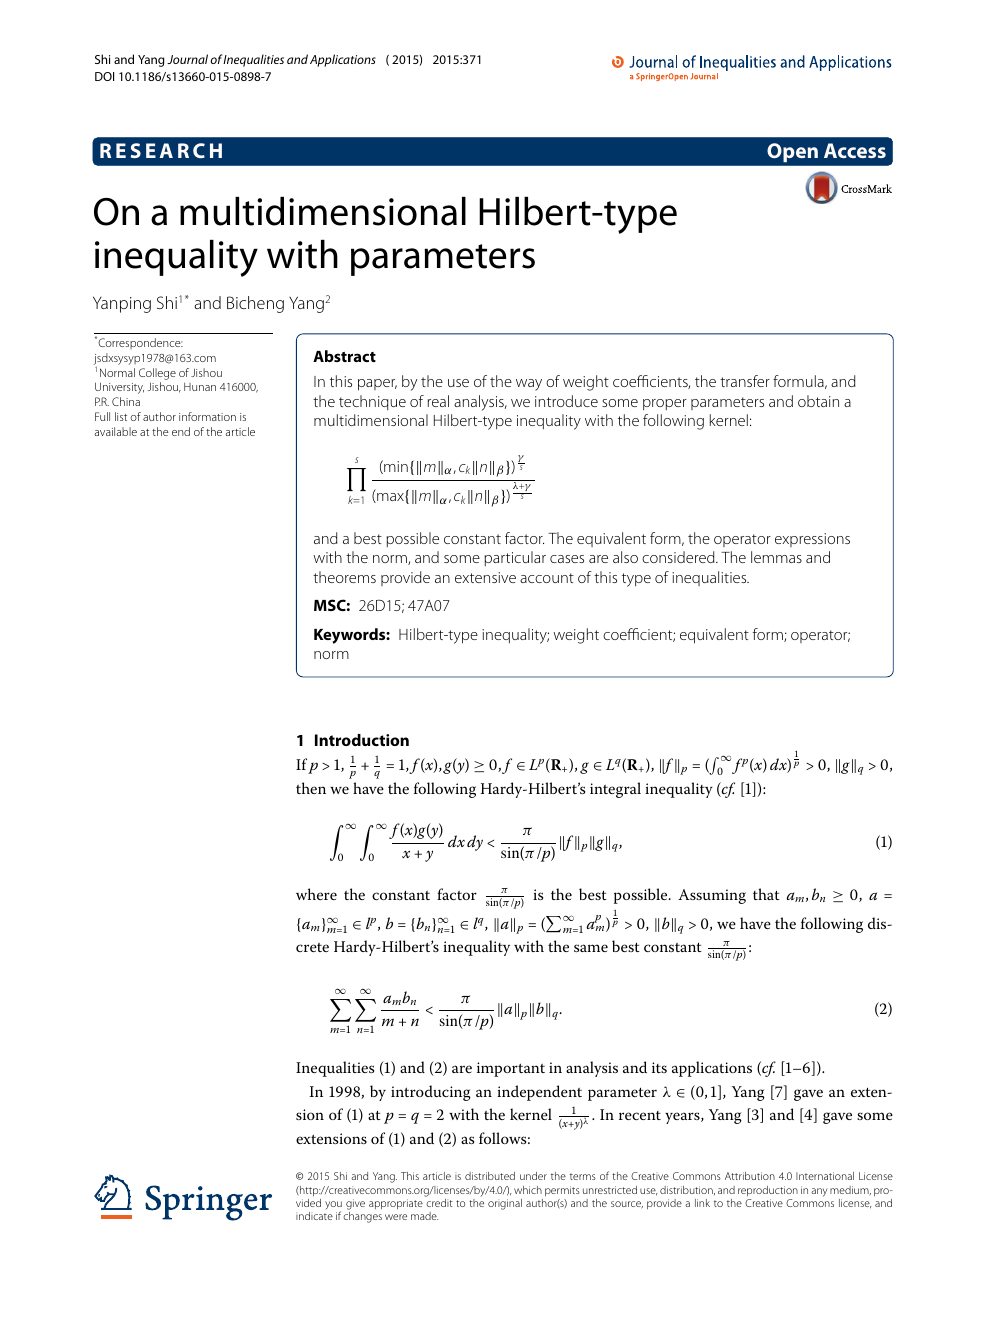 On A Multidimensional Hilbert Type Inequality With Parameters Topic Of Research Paper In Mathematics Download Scholarly Article Pdf And Read For Free On Cyberleninka Open Science Hub